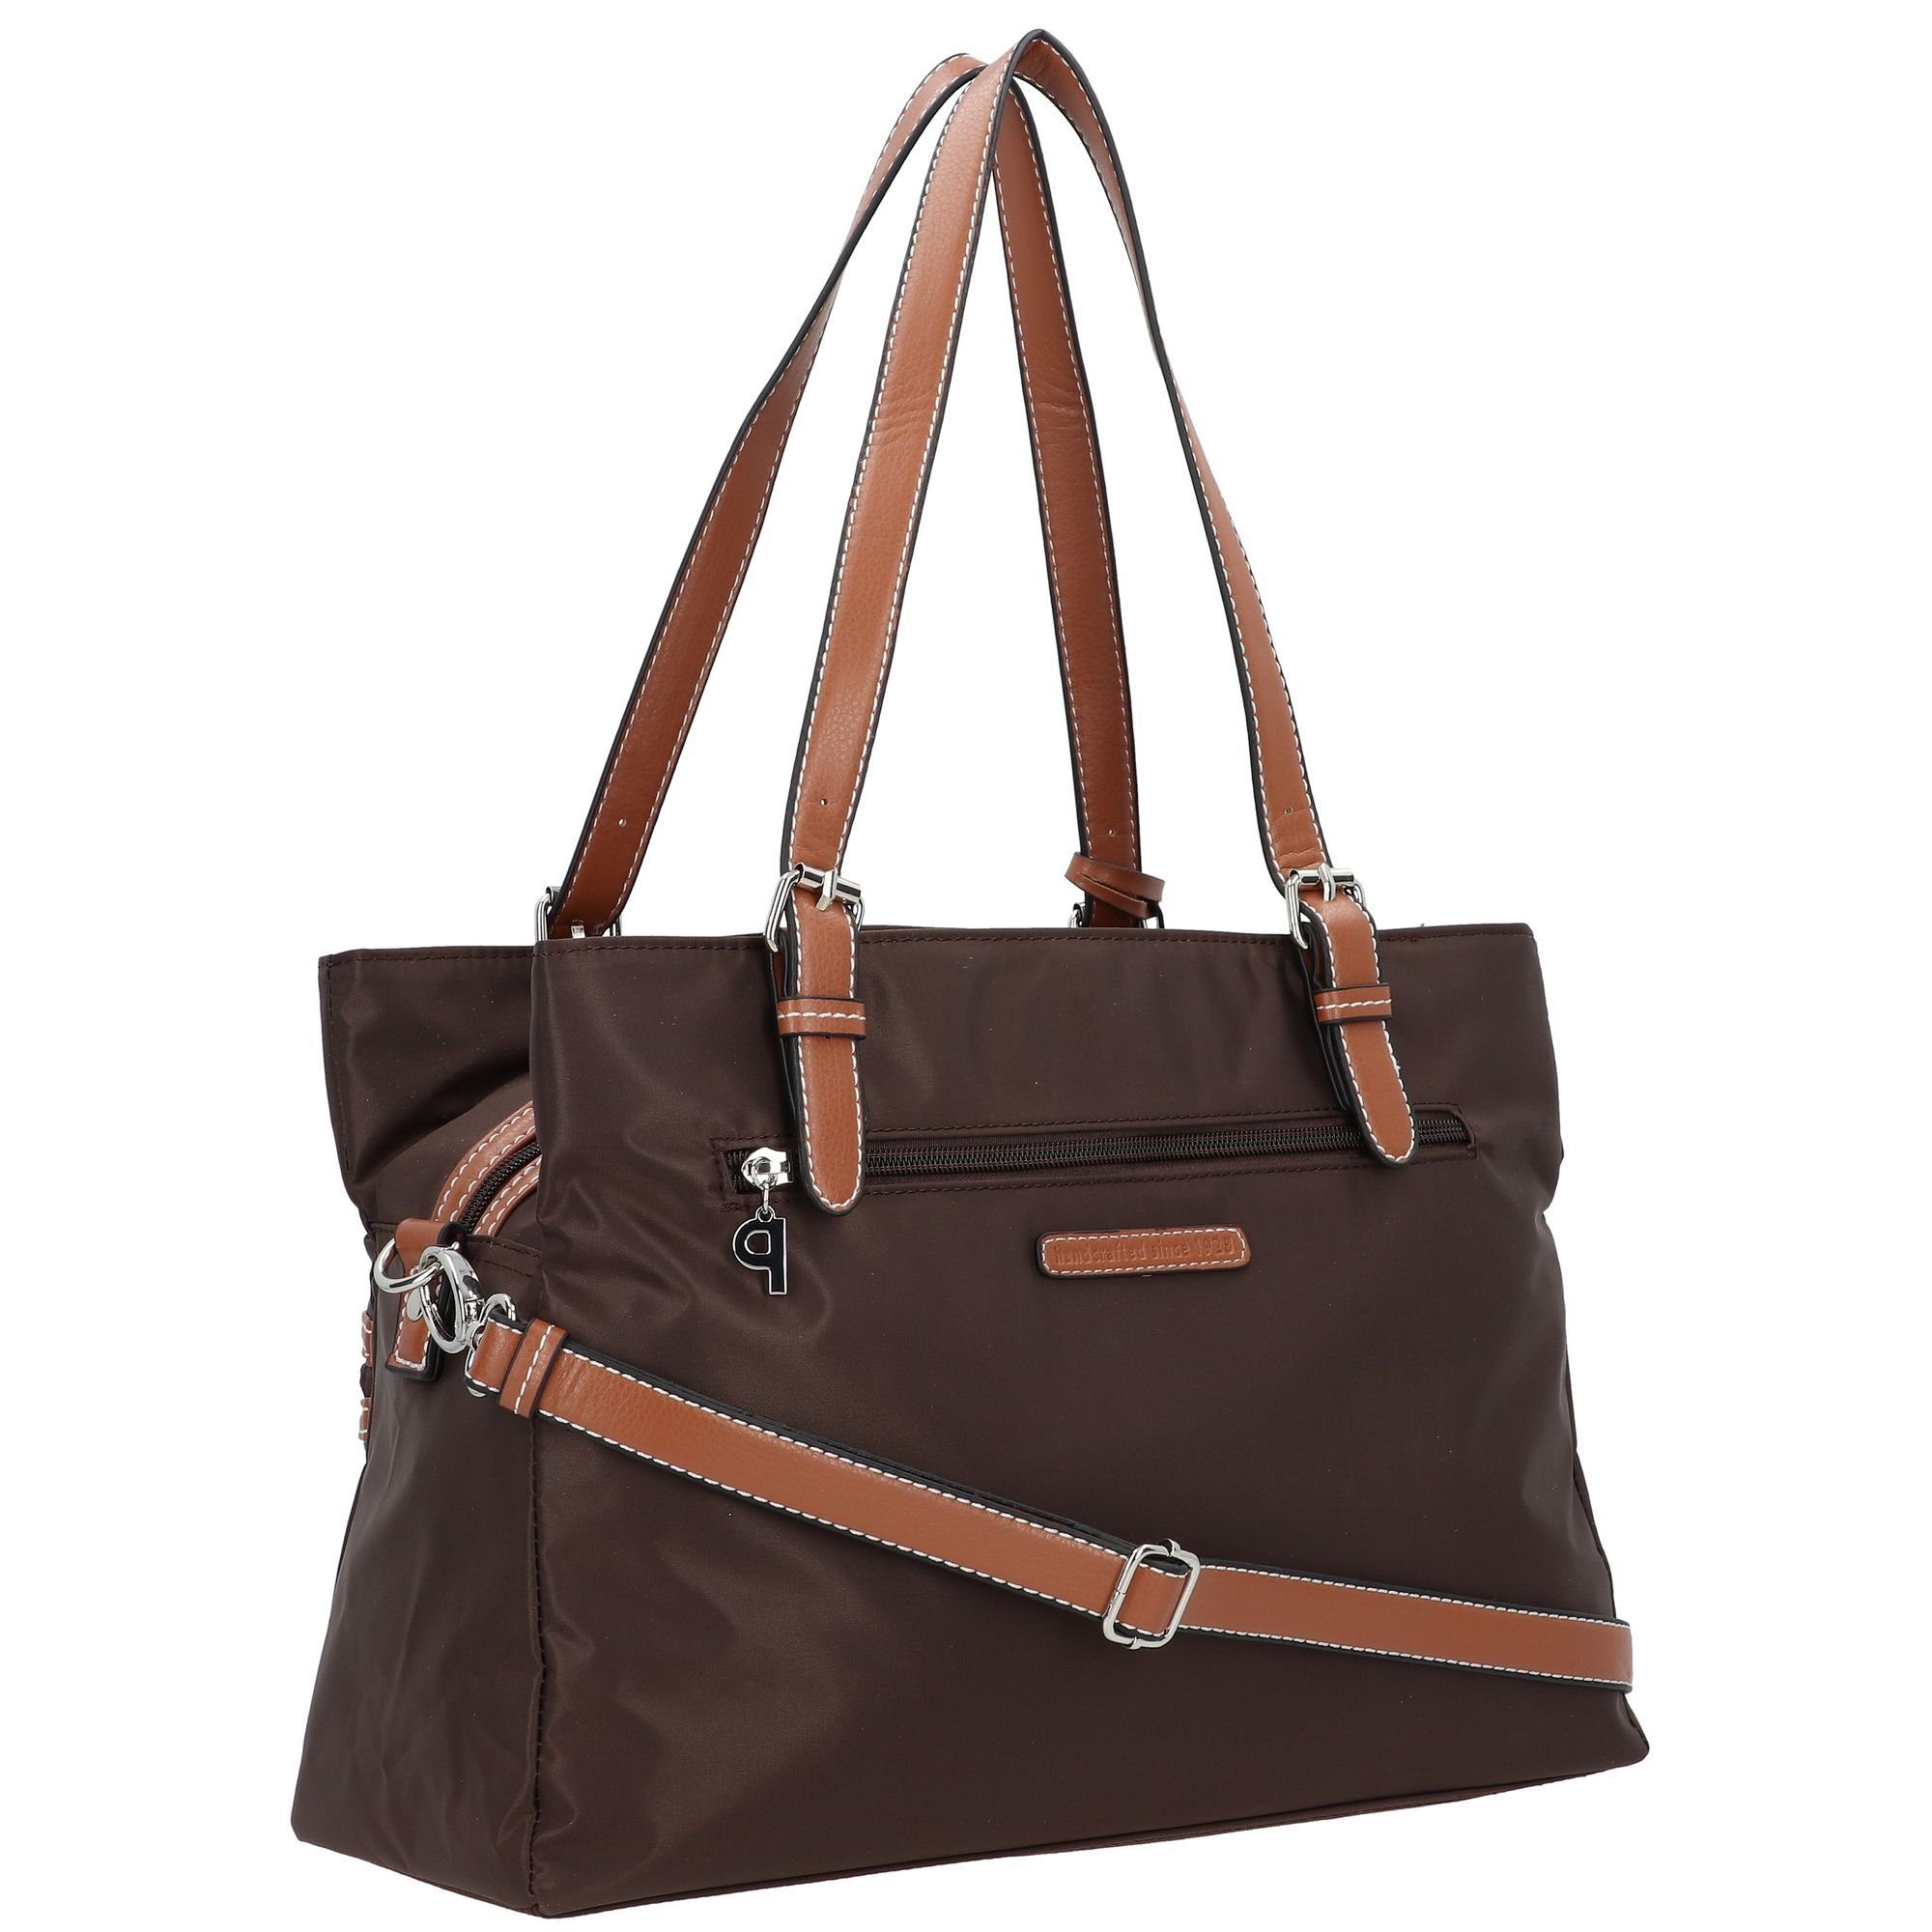 Picard Schultertasche Polyester Sonja, cafe